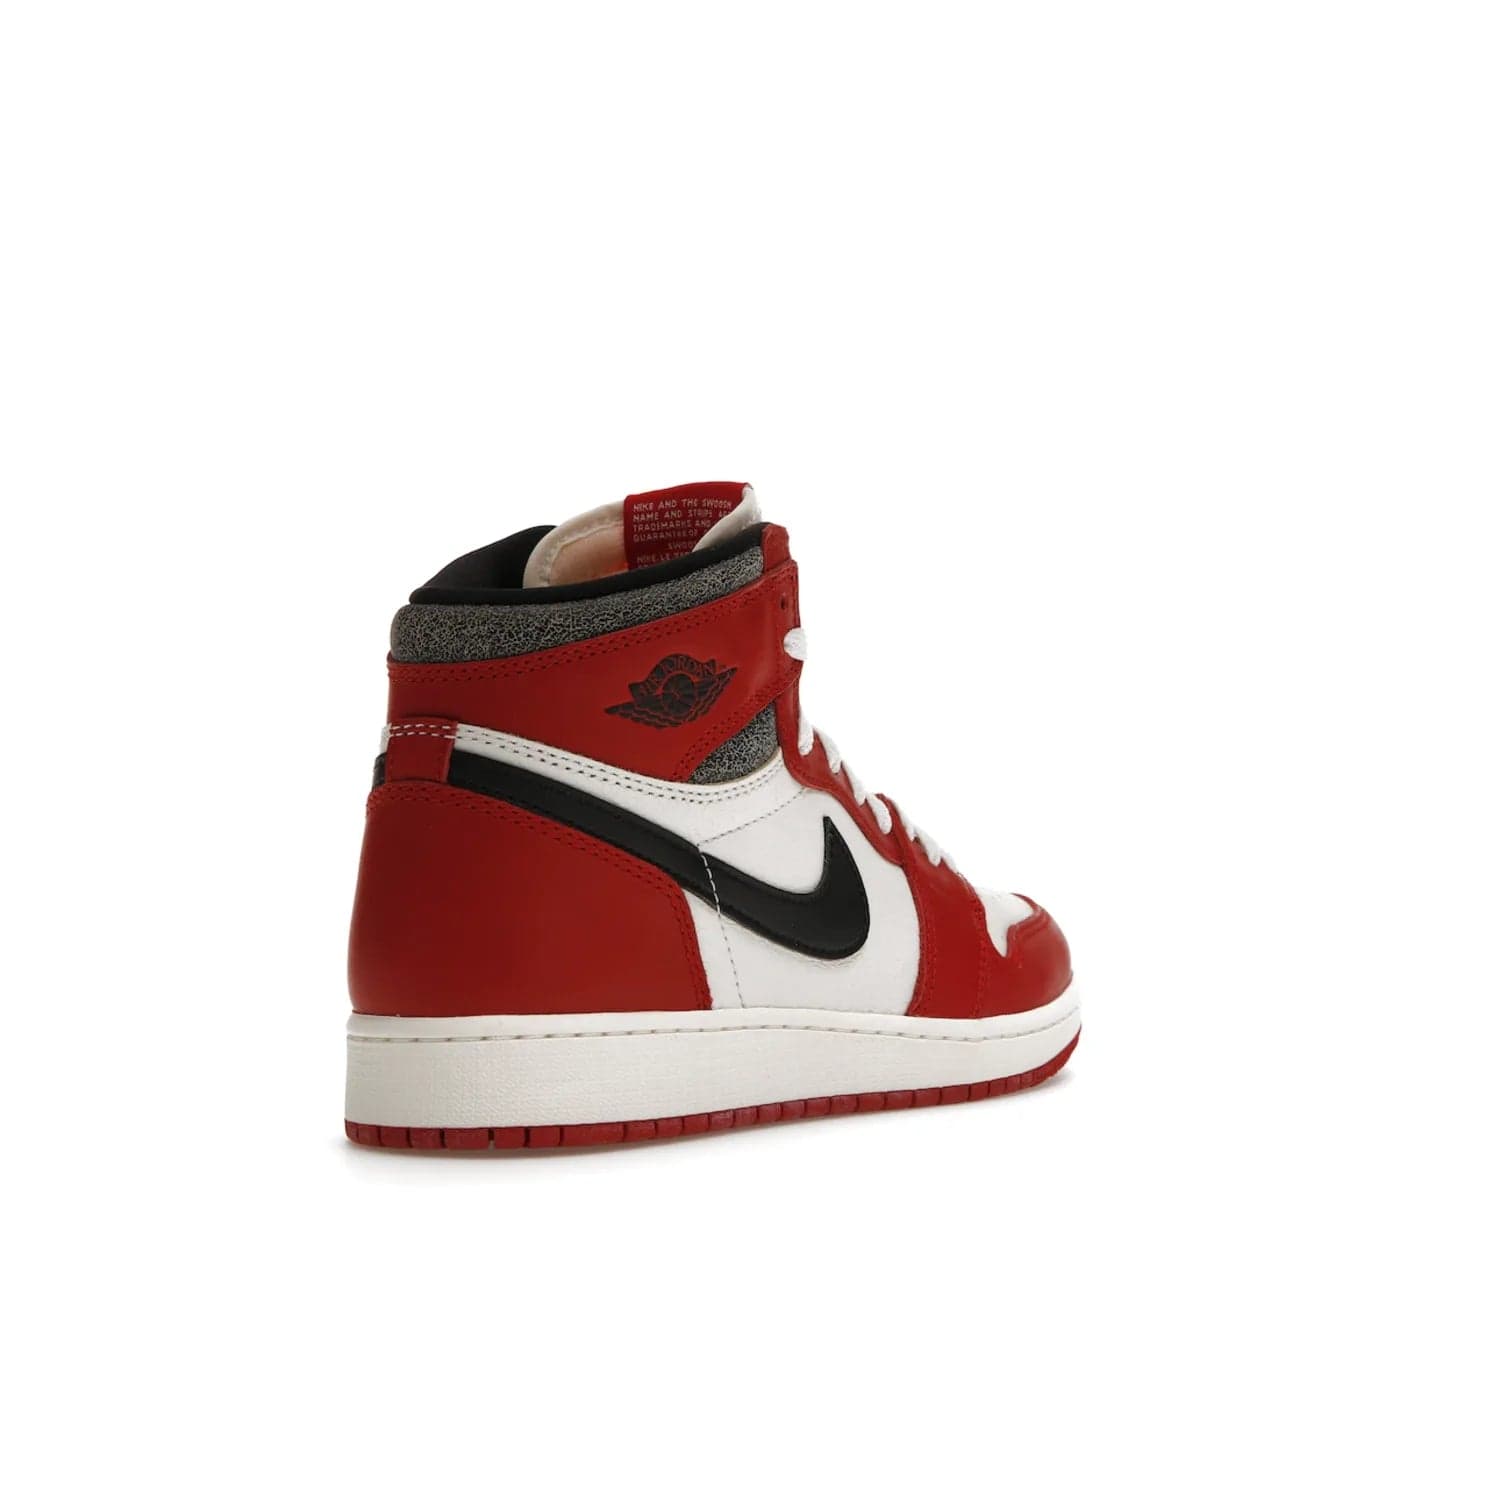 Jordan 1 Retro High OG Chicago Lost and Found (GS) - Image 32 - Only at www.BallersClubKickz.com - Grab the Air Jordan 1 Retro High OG Chicago Reimagined GS, presenting in classic 1985 silhouette. Varsity Red, Black, Muslin and Sail hues, featuring Nike Air branding, Wings on the collars and printed insoles. Don't miss out when it releases 19th Nov 2022.